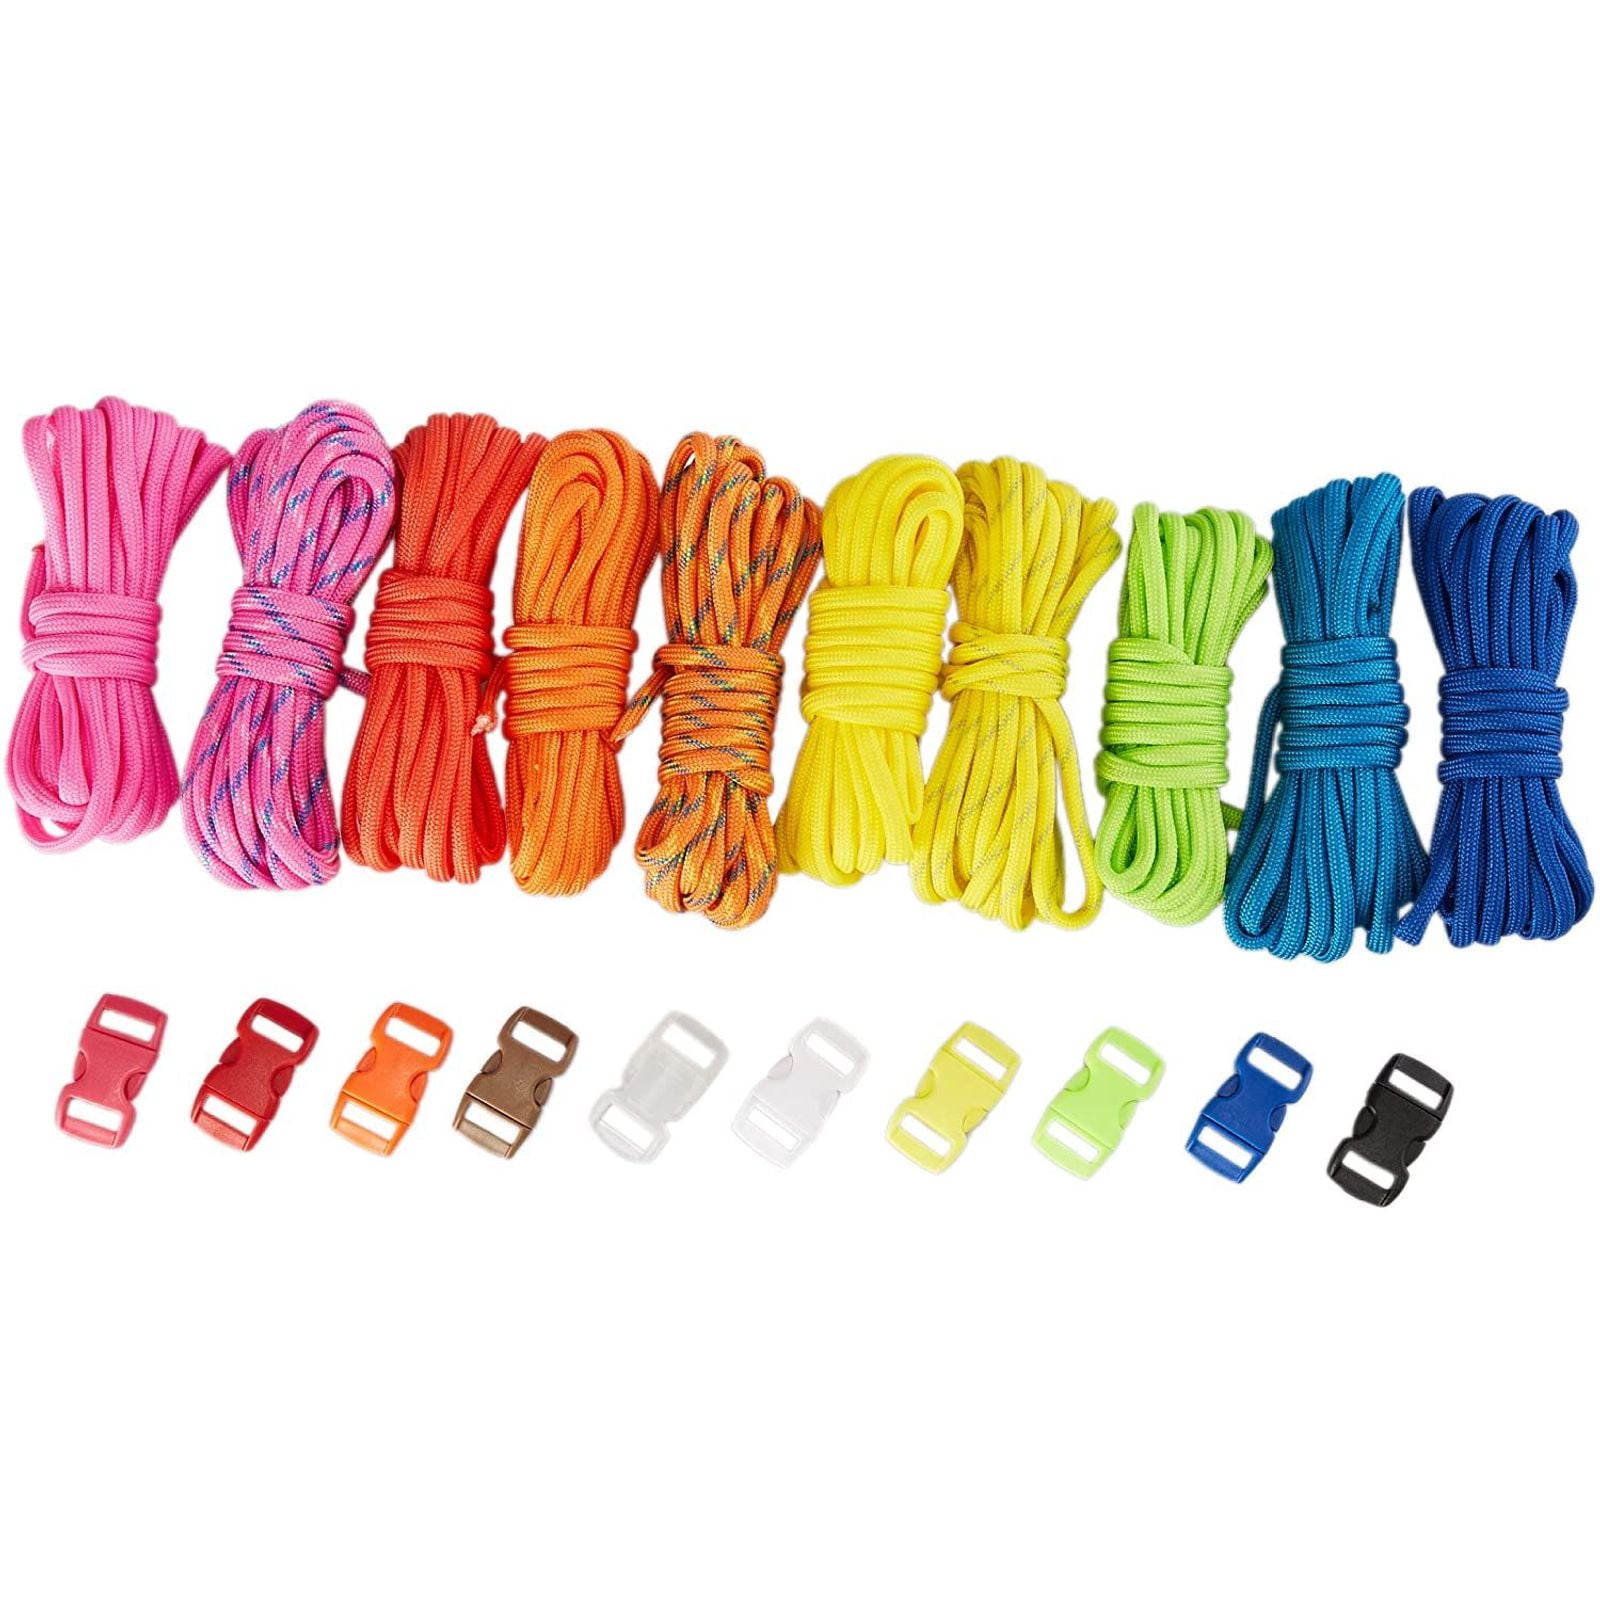 OxGord Paracord Mil Spec Type III 7 Strand Parachute Commercial Grade Nylon Cord Spool for Outdoor Hiking Wristband Bracelet Strong Strength Rope Tie Down 